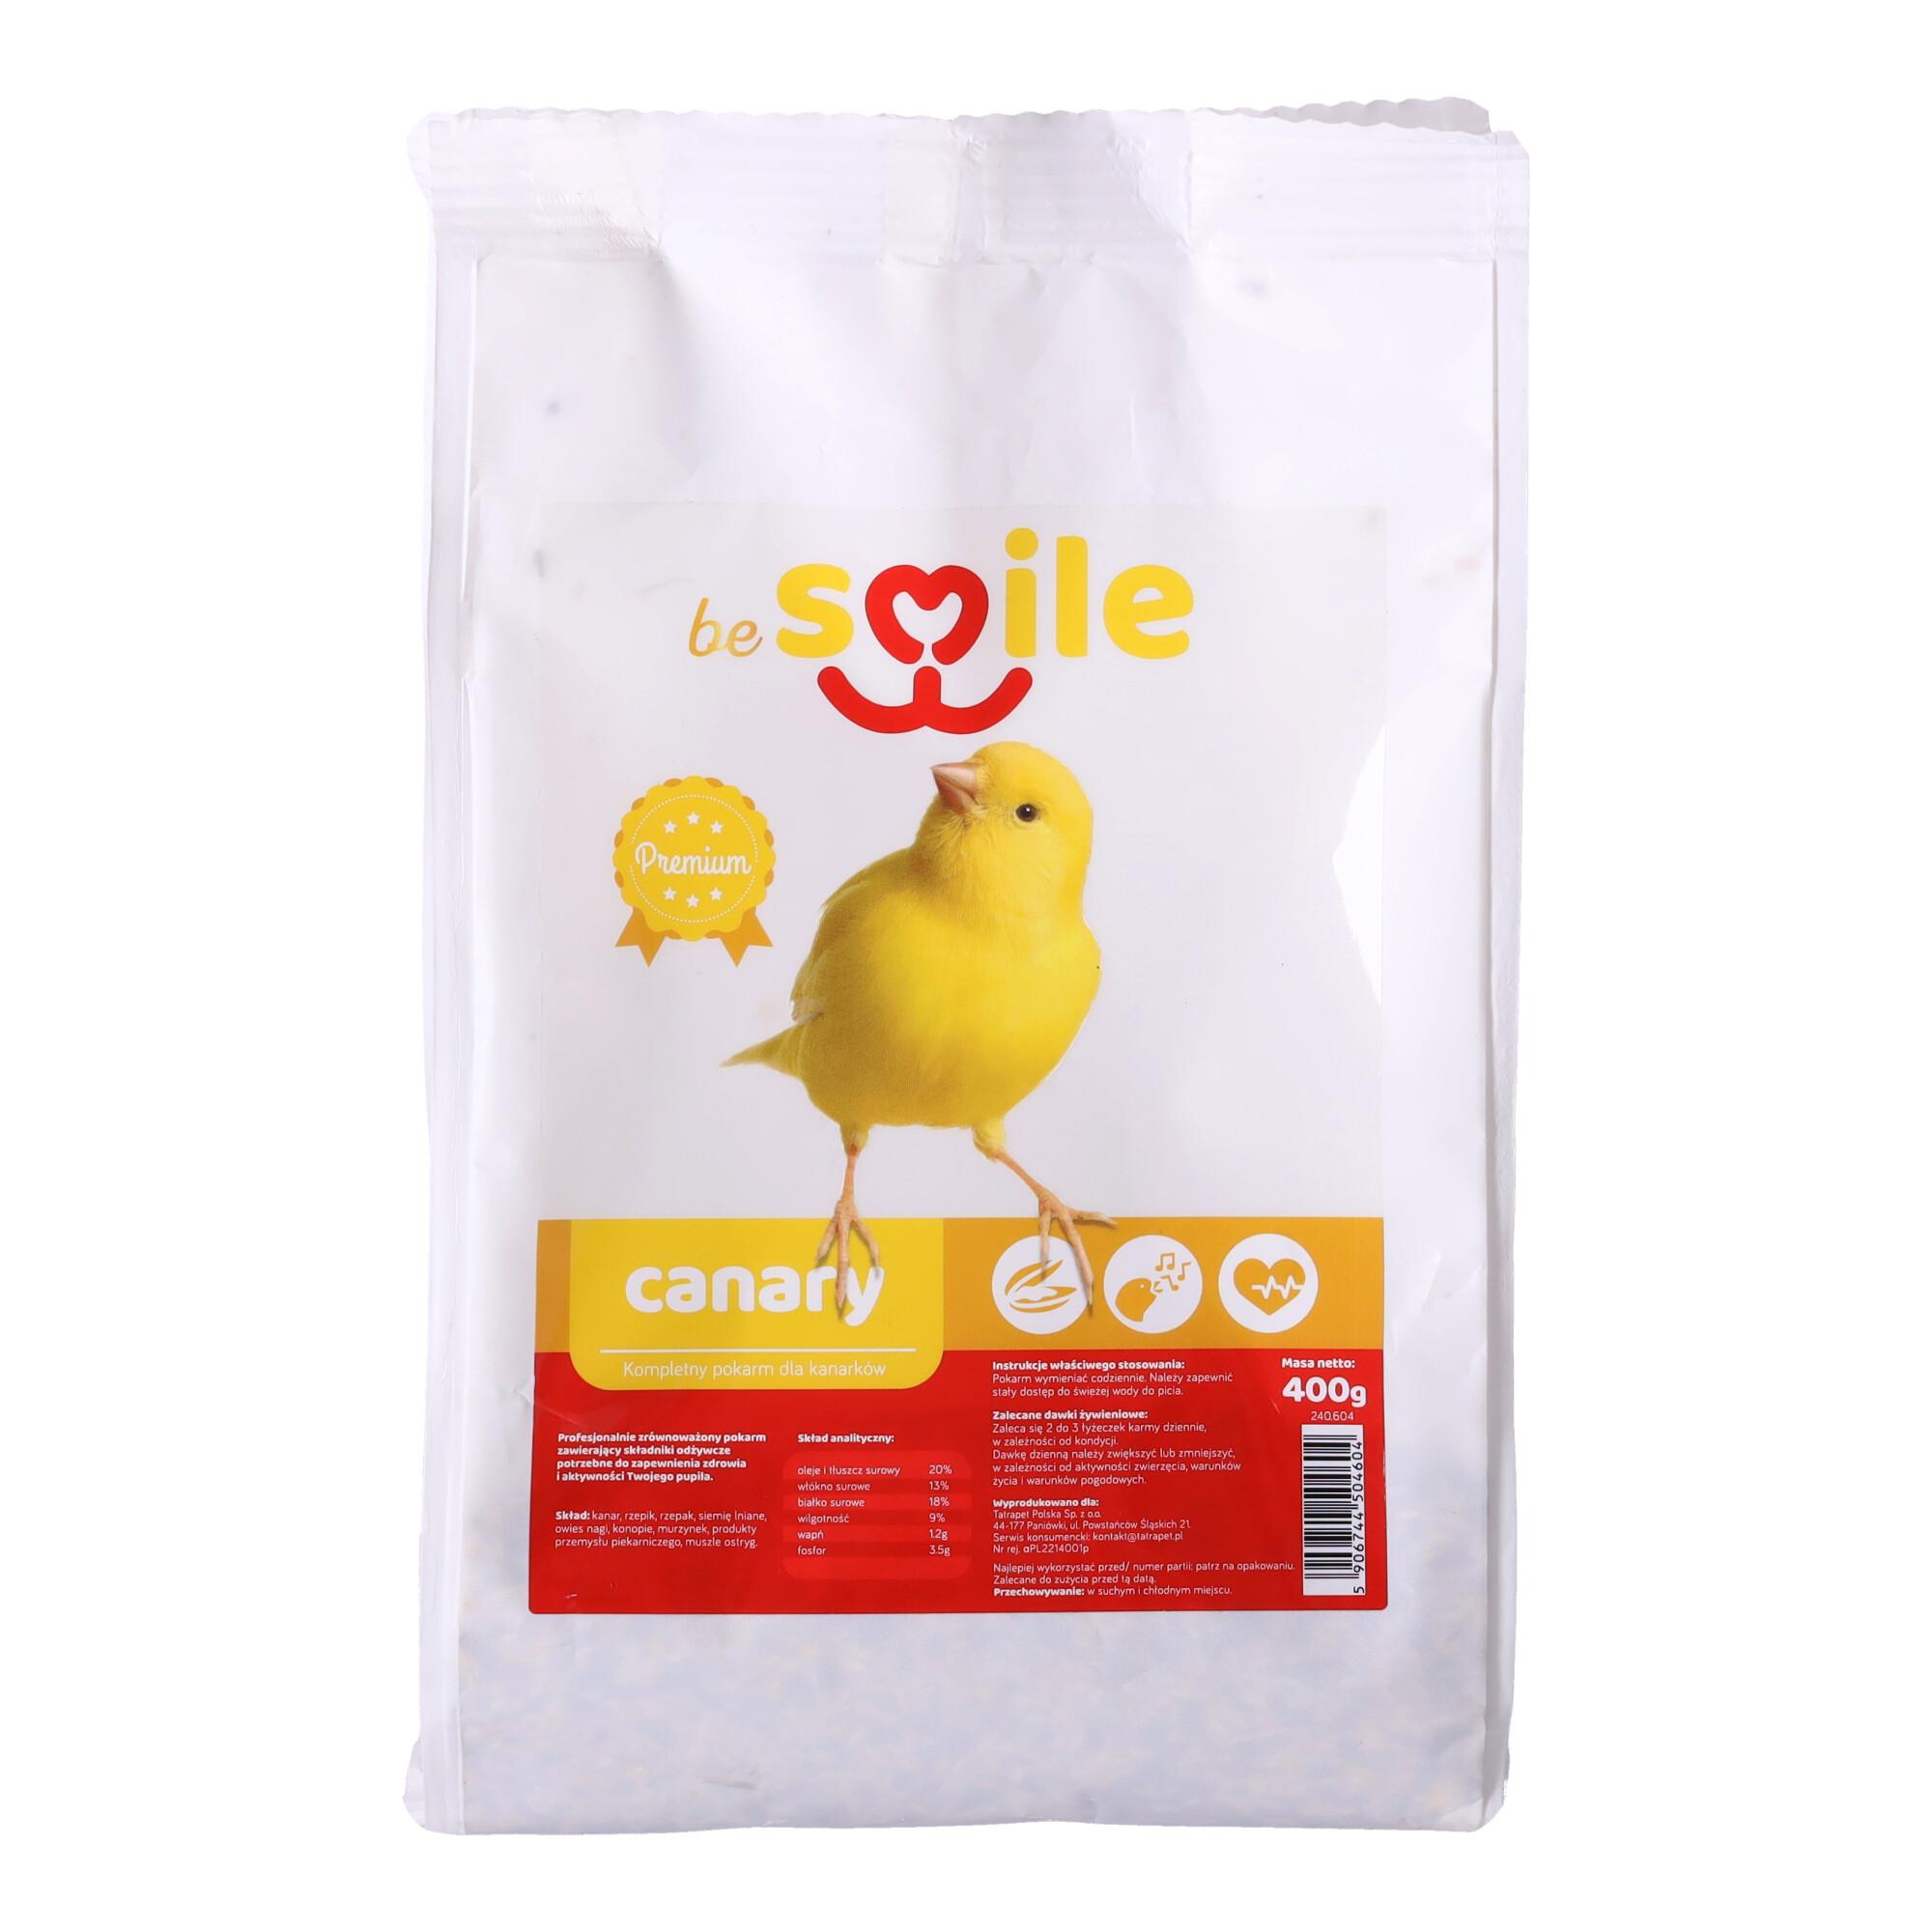 beSMILE CANARY food - Canary 400g food for canaries